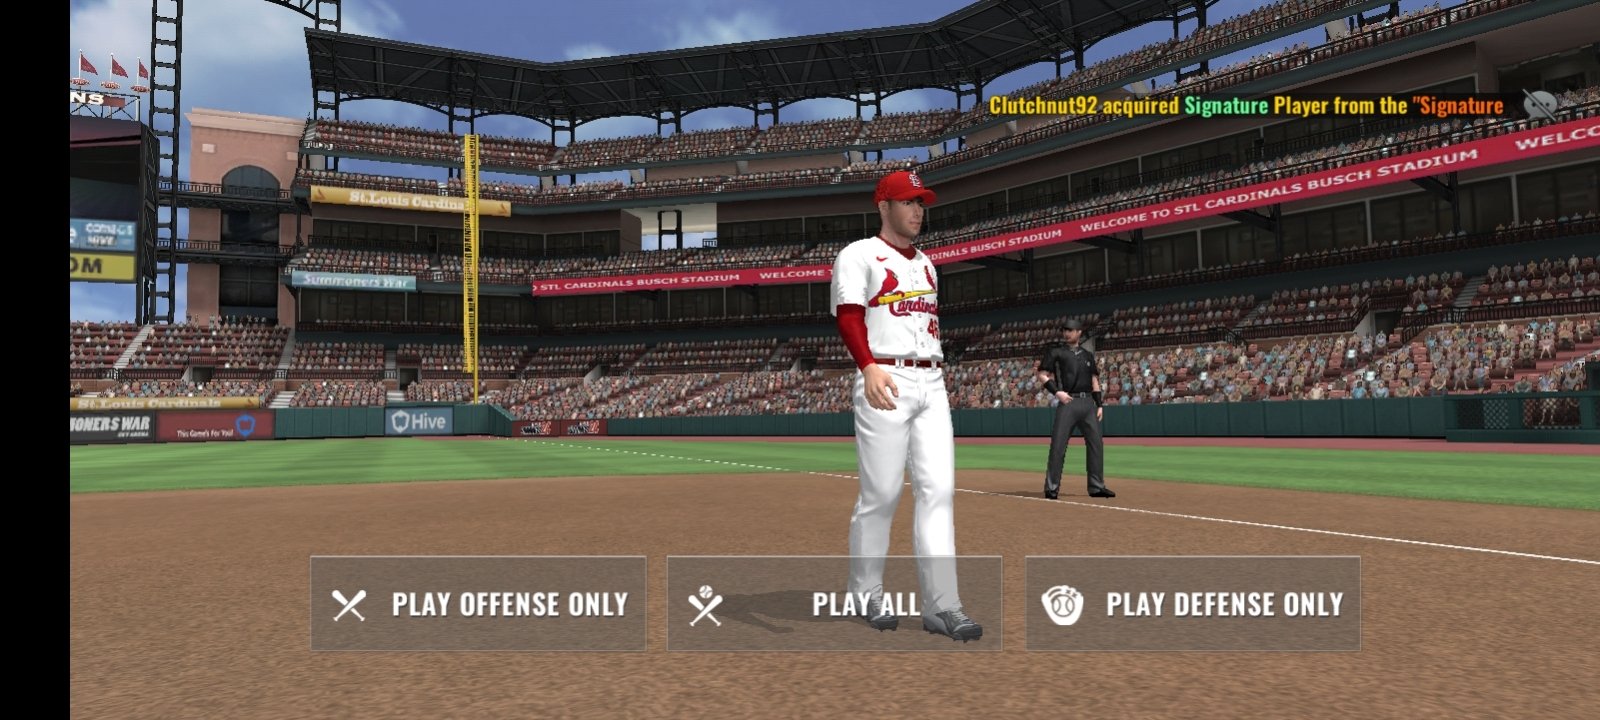 mlb 9 innings 19 check network connection